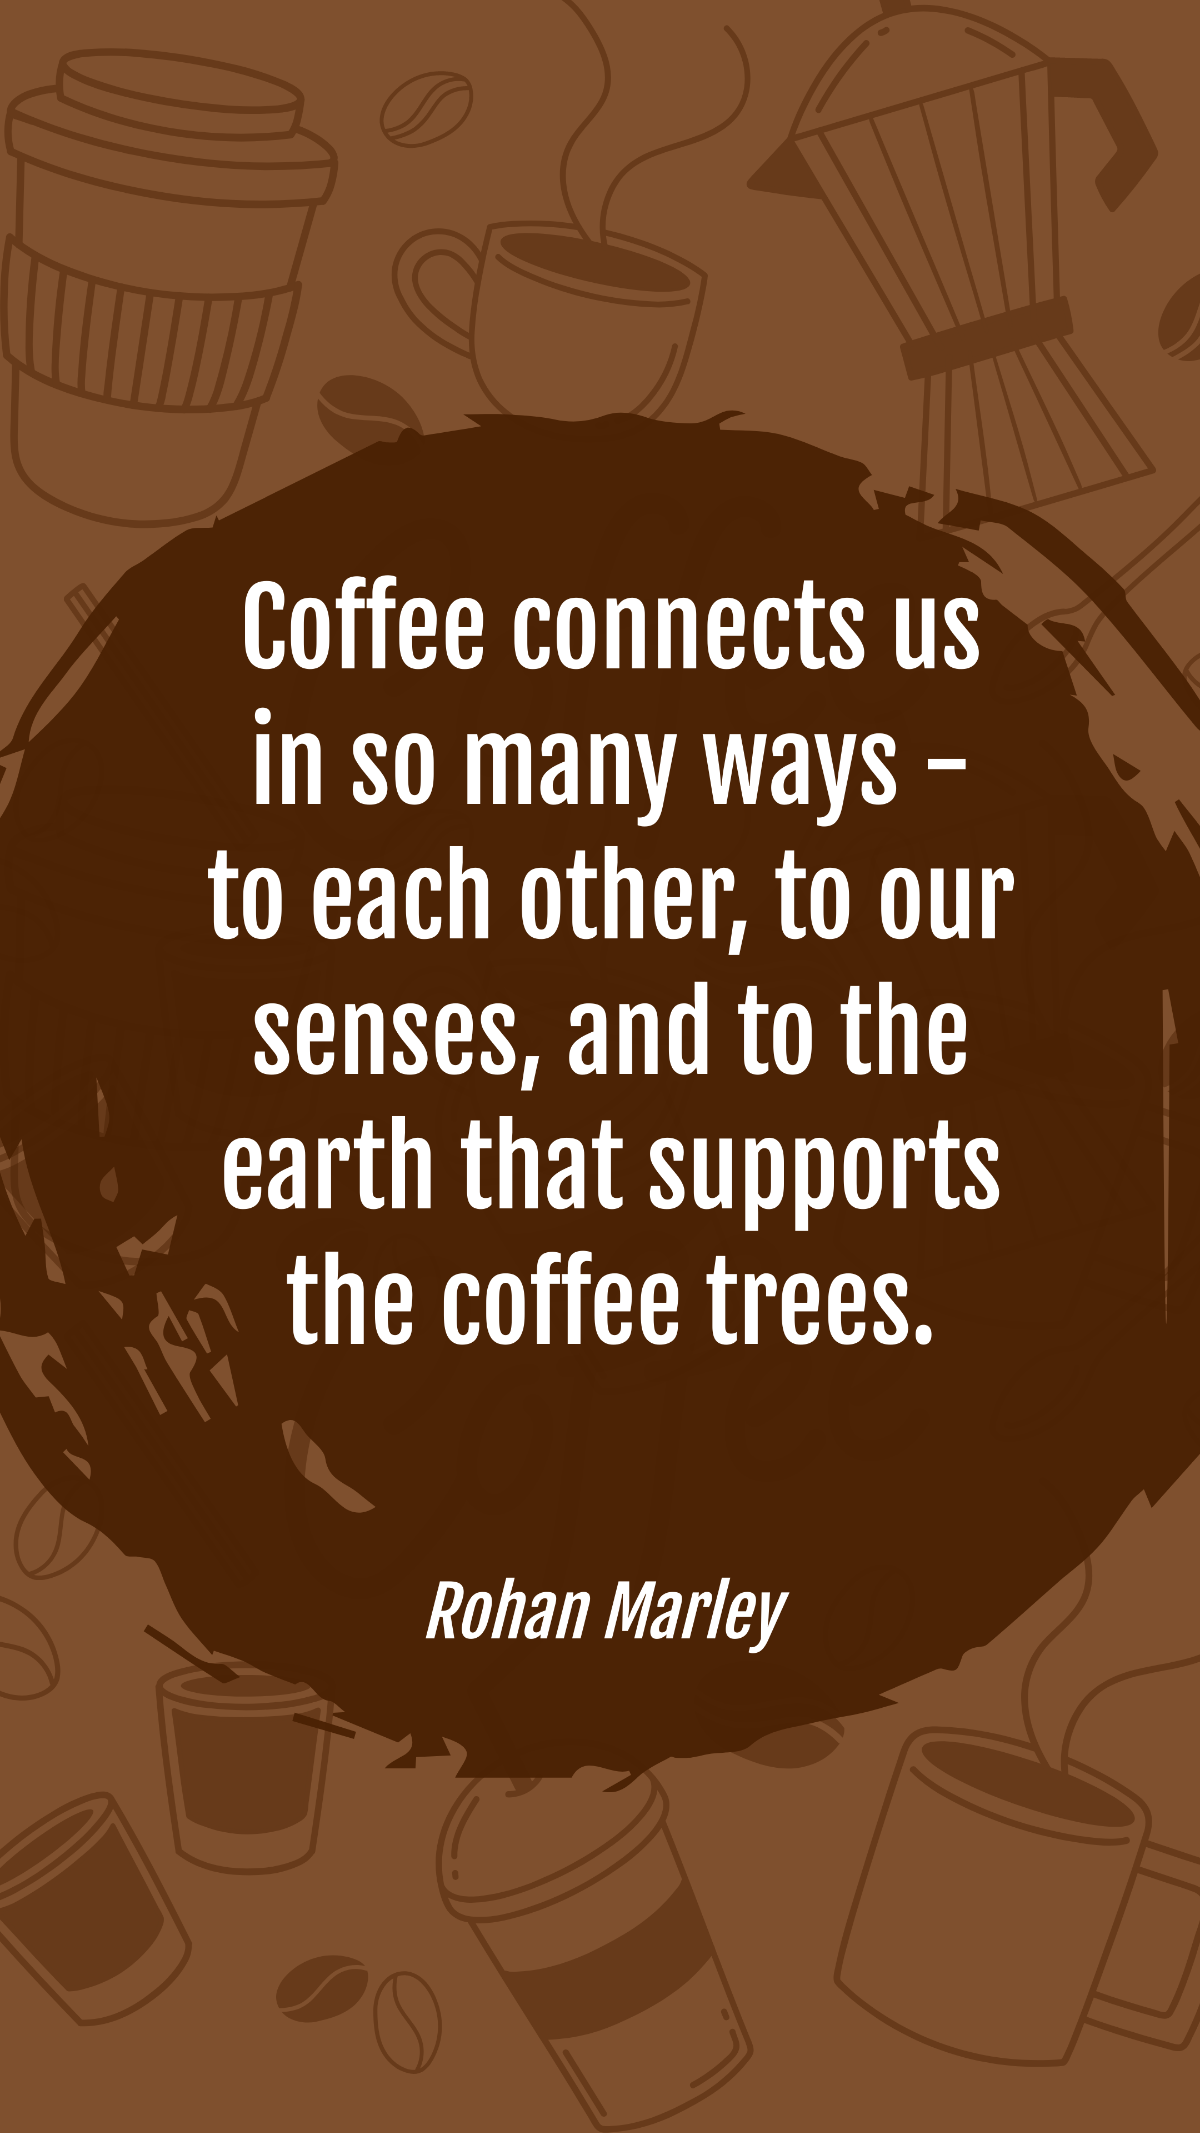 Rohan Marley - Coffee connects us in so many ways - to each other, to our senses, and to the earth that supports the coffee trees.